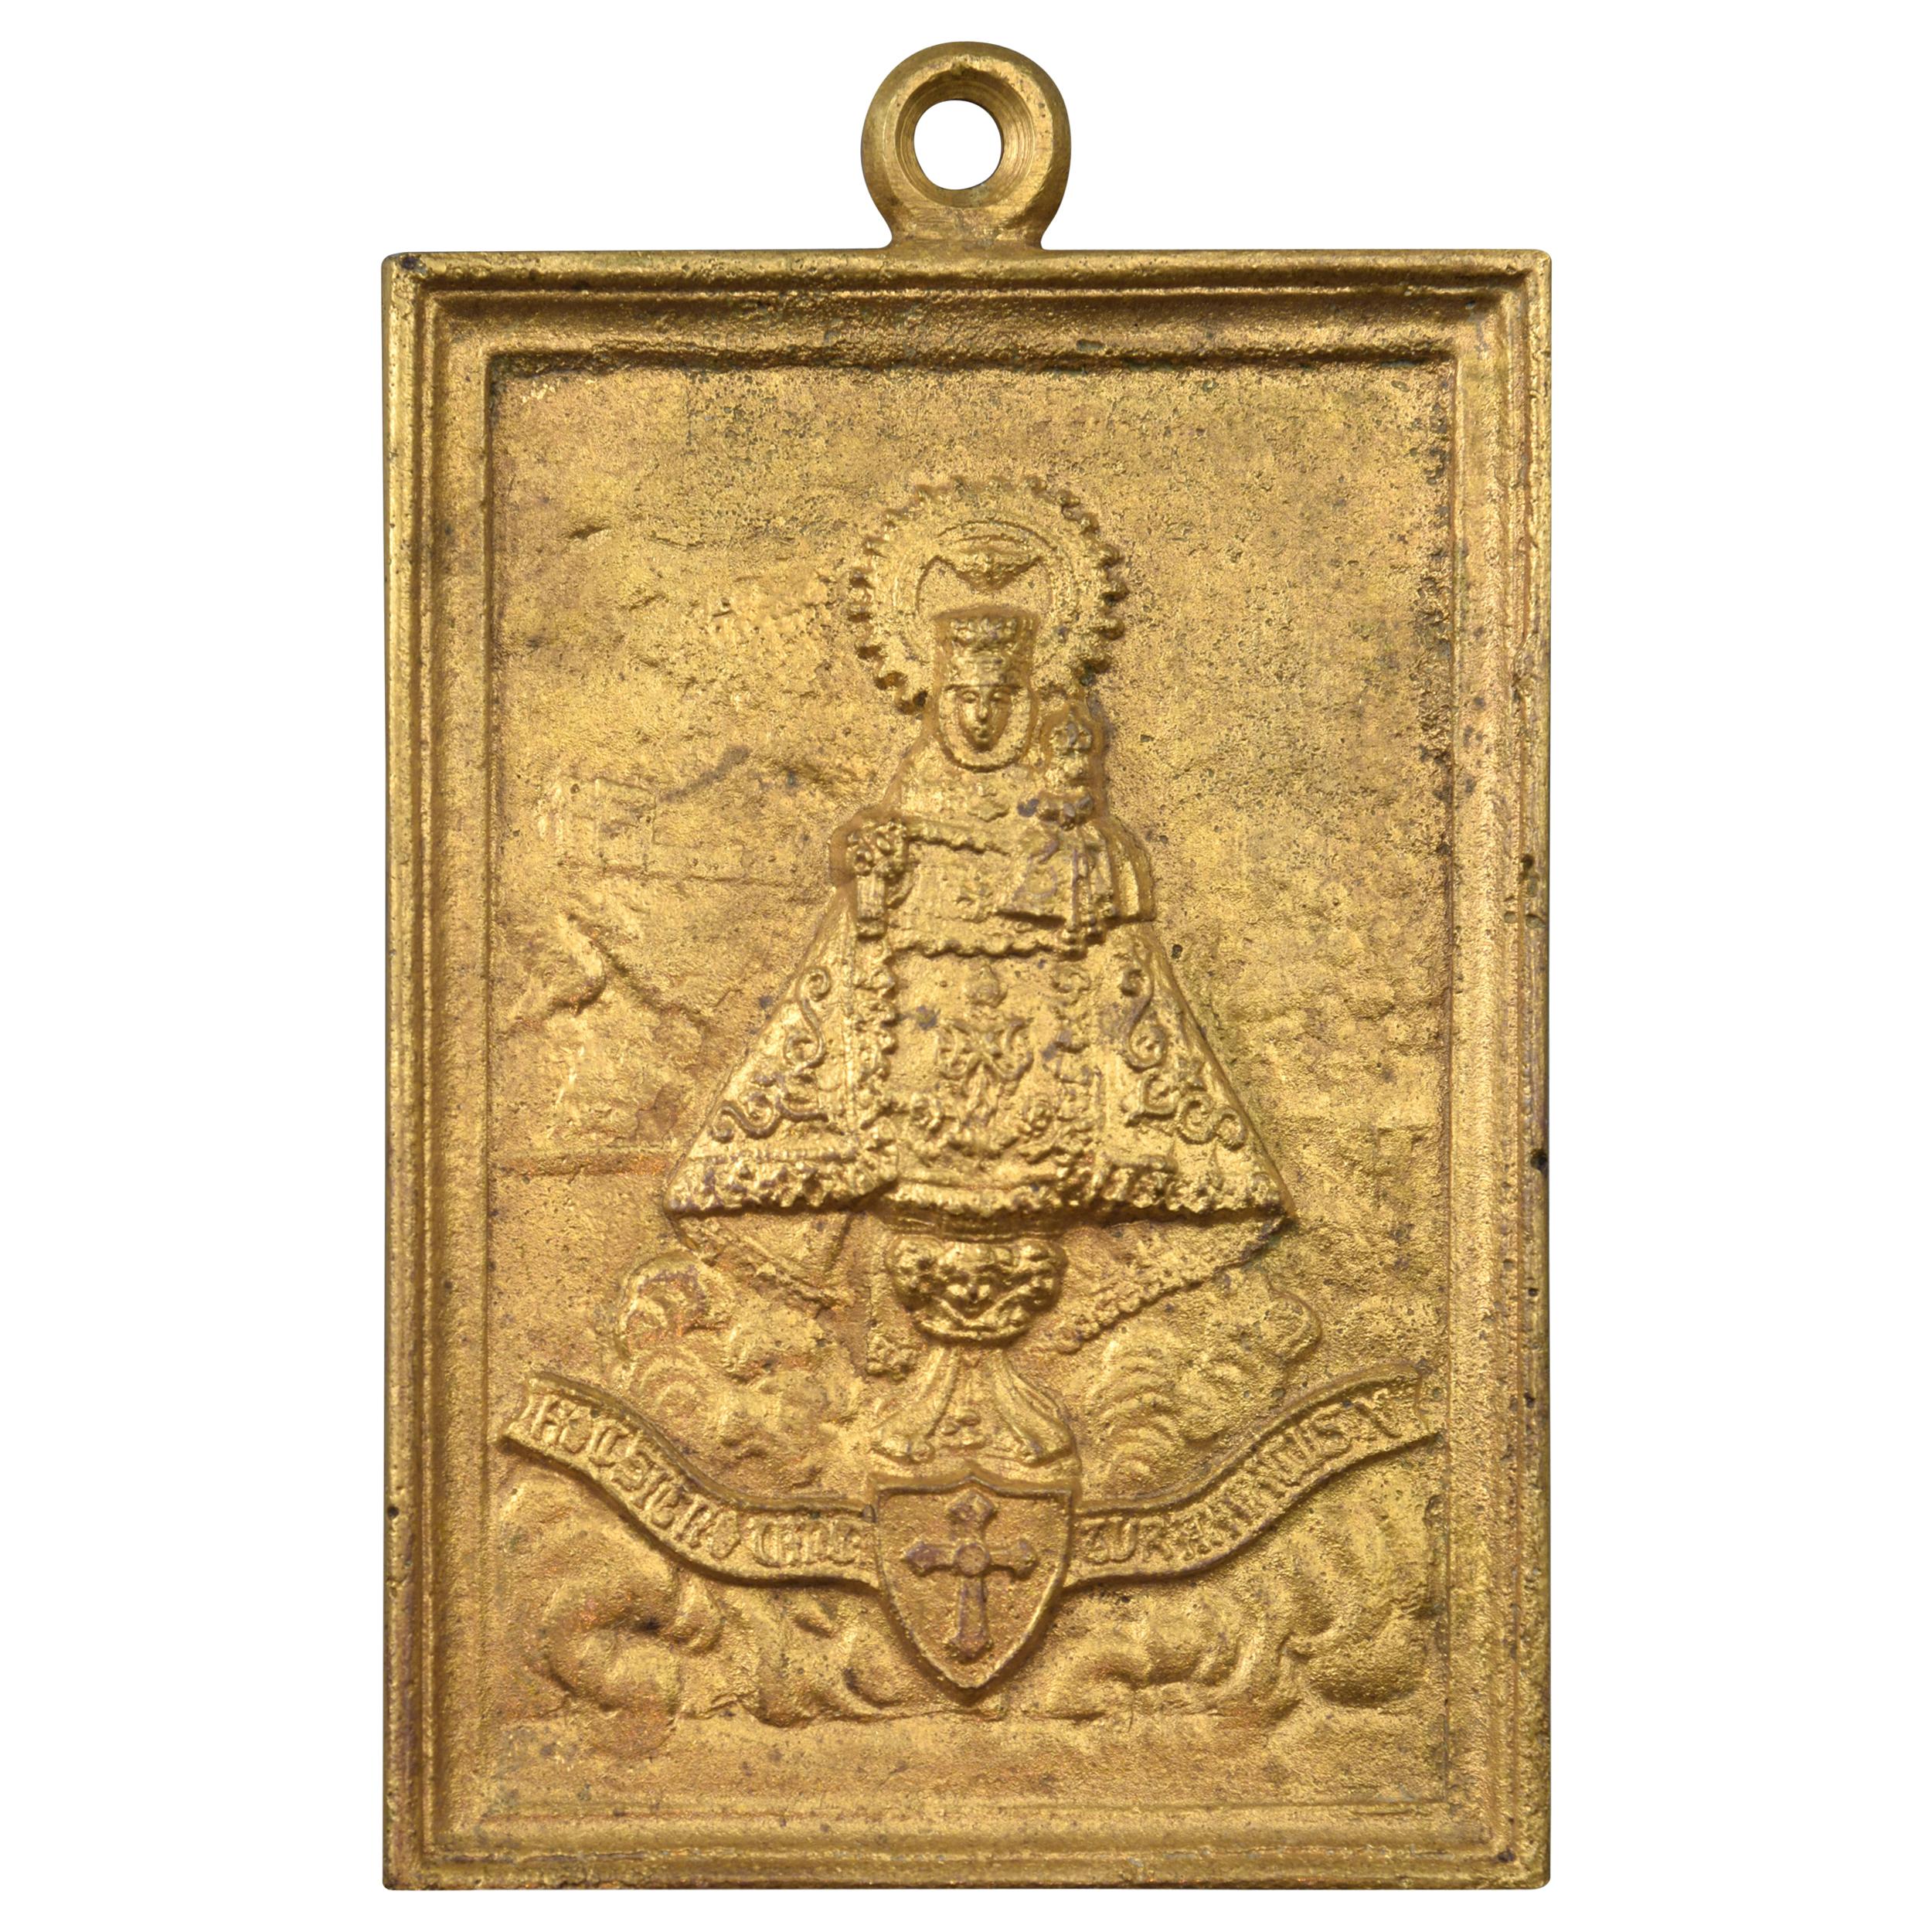 Bronze Devotional Plaque, Our Lady of Covadonga or Cuadonga, 20th Century